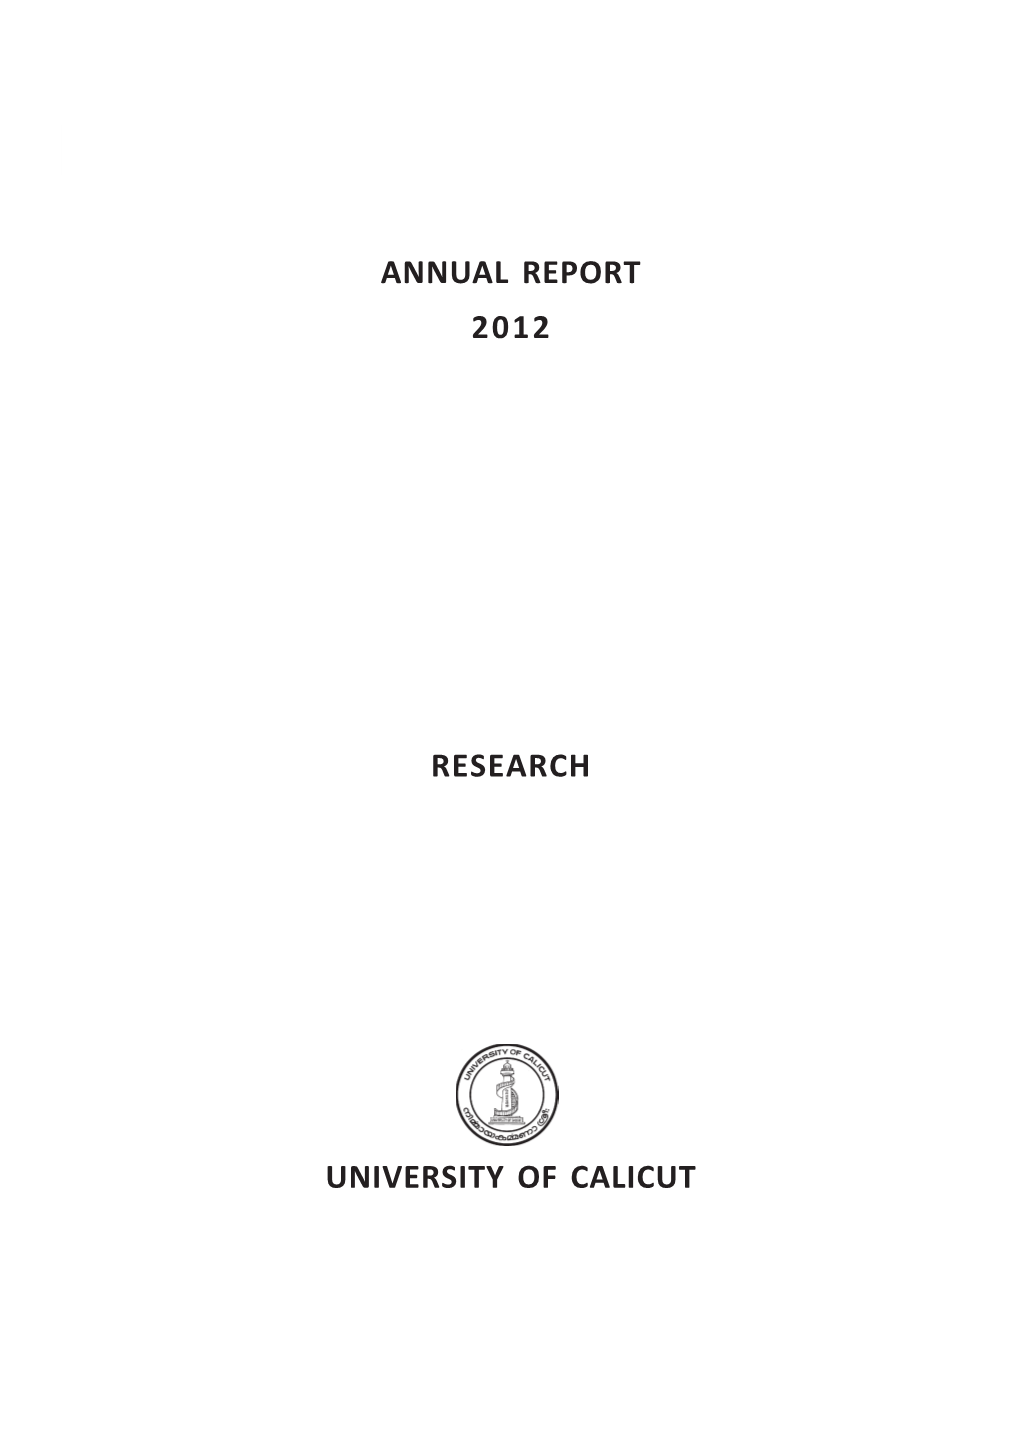 Annual Report RESEARCHNEW 2012 15.5.2013. for Butter.Pmd